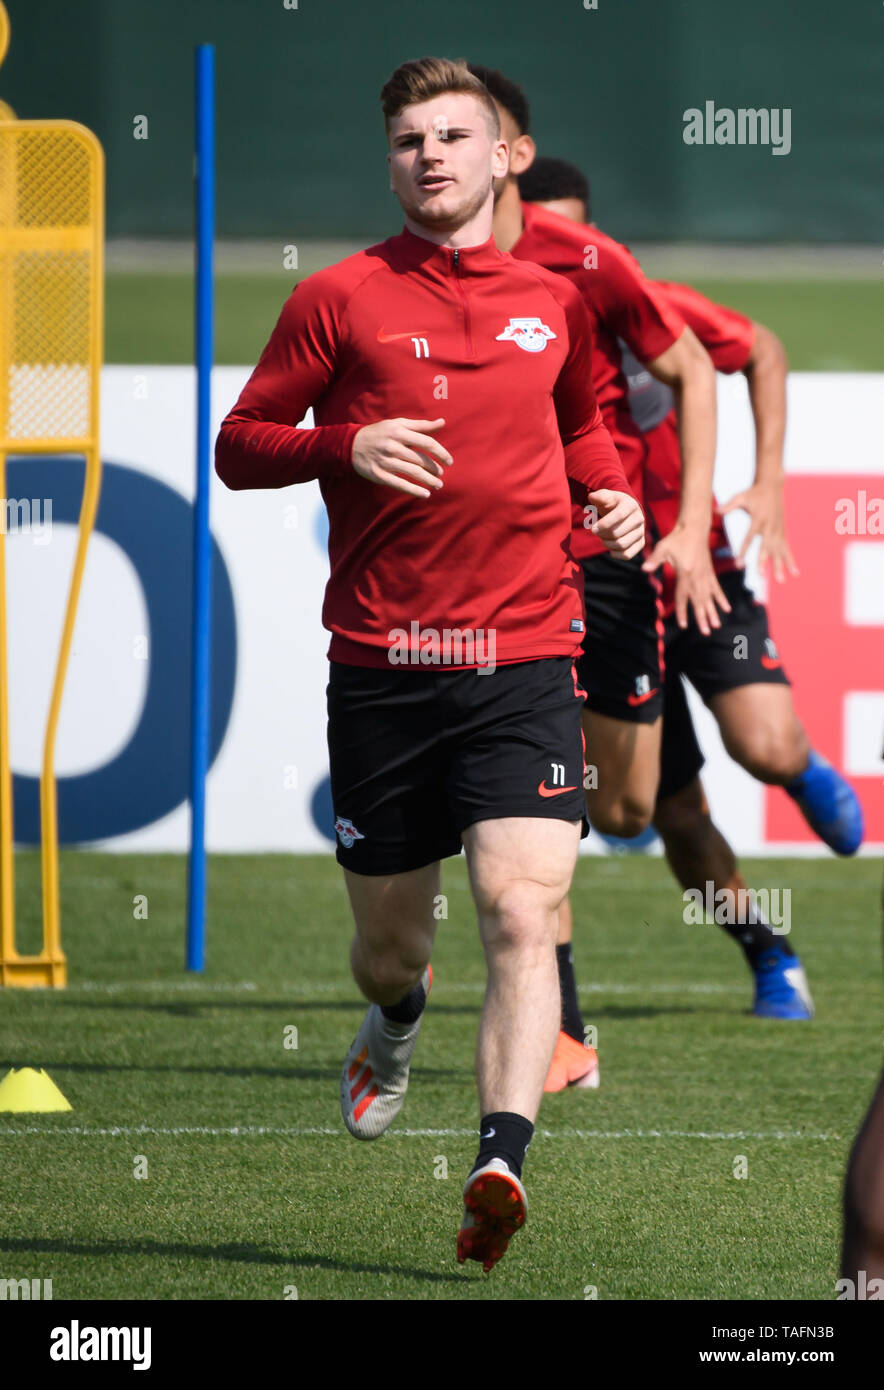 Berlin, Germany. 24th May, 2019. Leipzig's Timo Werner attends a training session for the upcoming German Cup final match between RB Leipzig and FC Bayern Munich in Leipzig, Germany, on May 24, 2019. Credit: Kevin Voigt/Xinhua/Alamy Live News Stock Photo